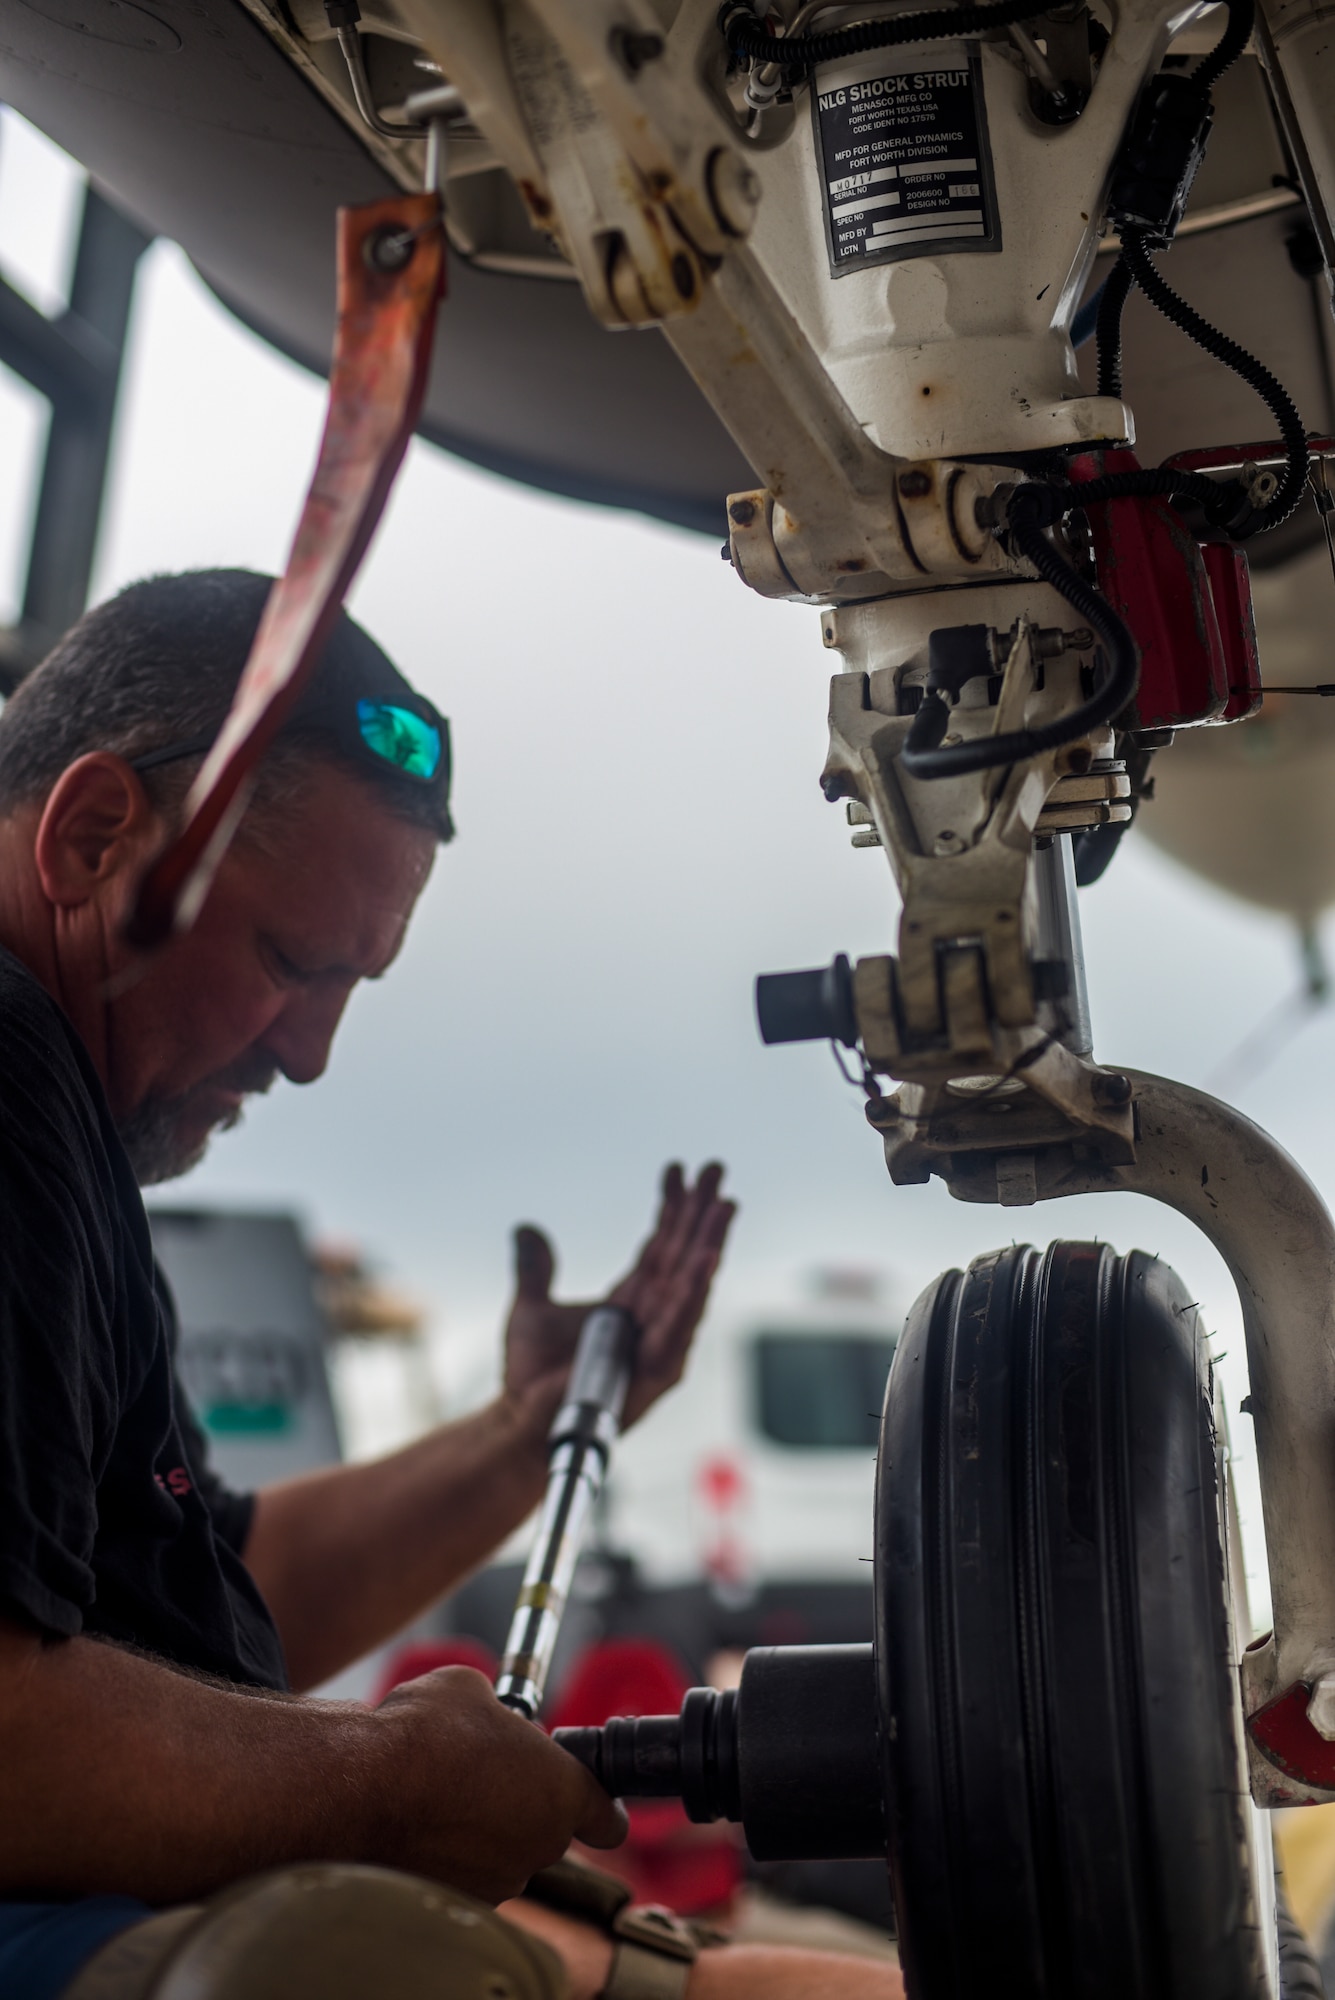 Michael Reeves with the 82nd Aerial Targets Squadron, contractor, tightens the nuts and bolts after replacing the tire of the front landing gear of a QF-16 at Tyndall Air Force Base, Florida, July 9, 2020. The 82nd ARTS contractors fulfill a variety of different flight line technical skills including replacing old or malfunctioning landing gear. (U.S. Air Force photo by Staff Sgt. Magen M. Reeves)